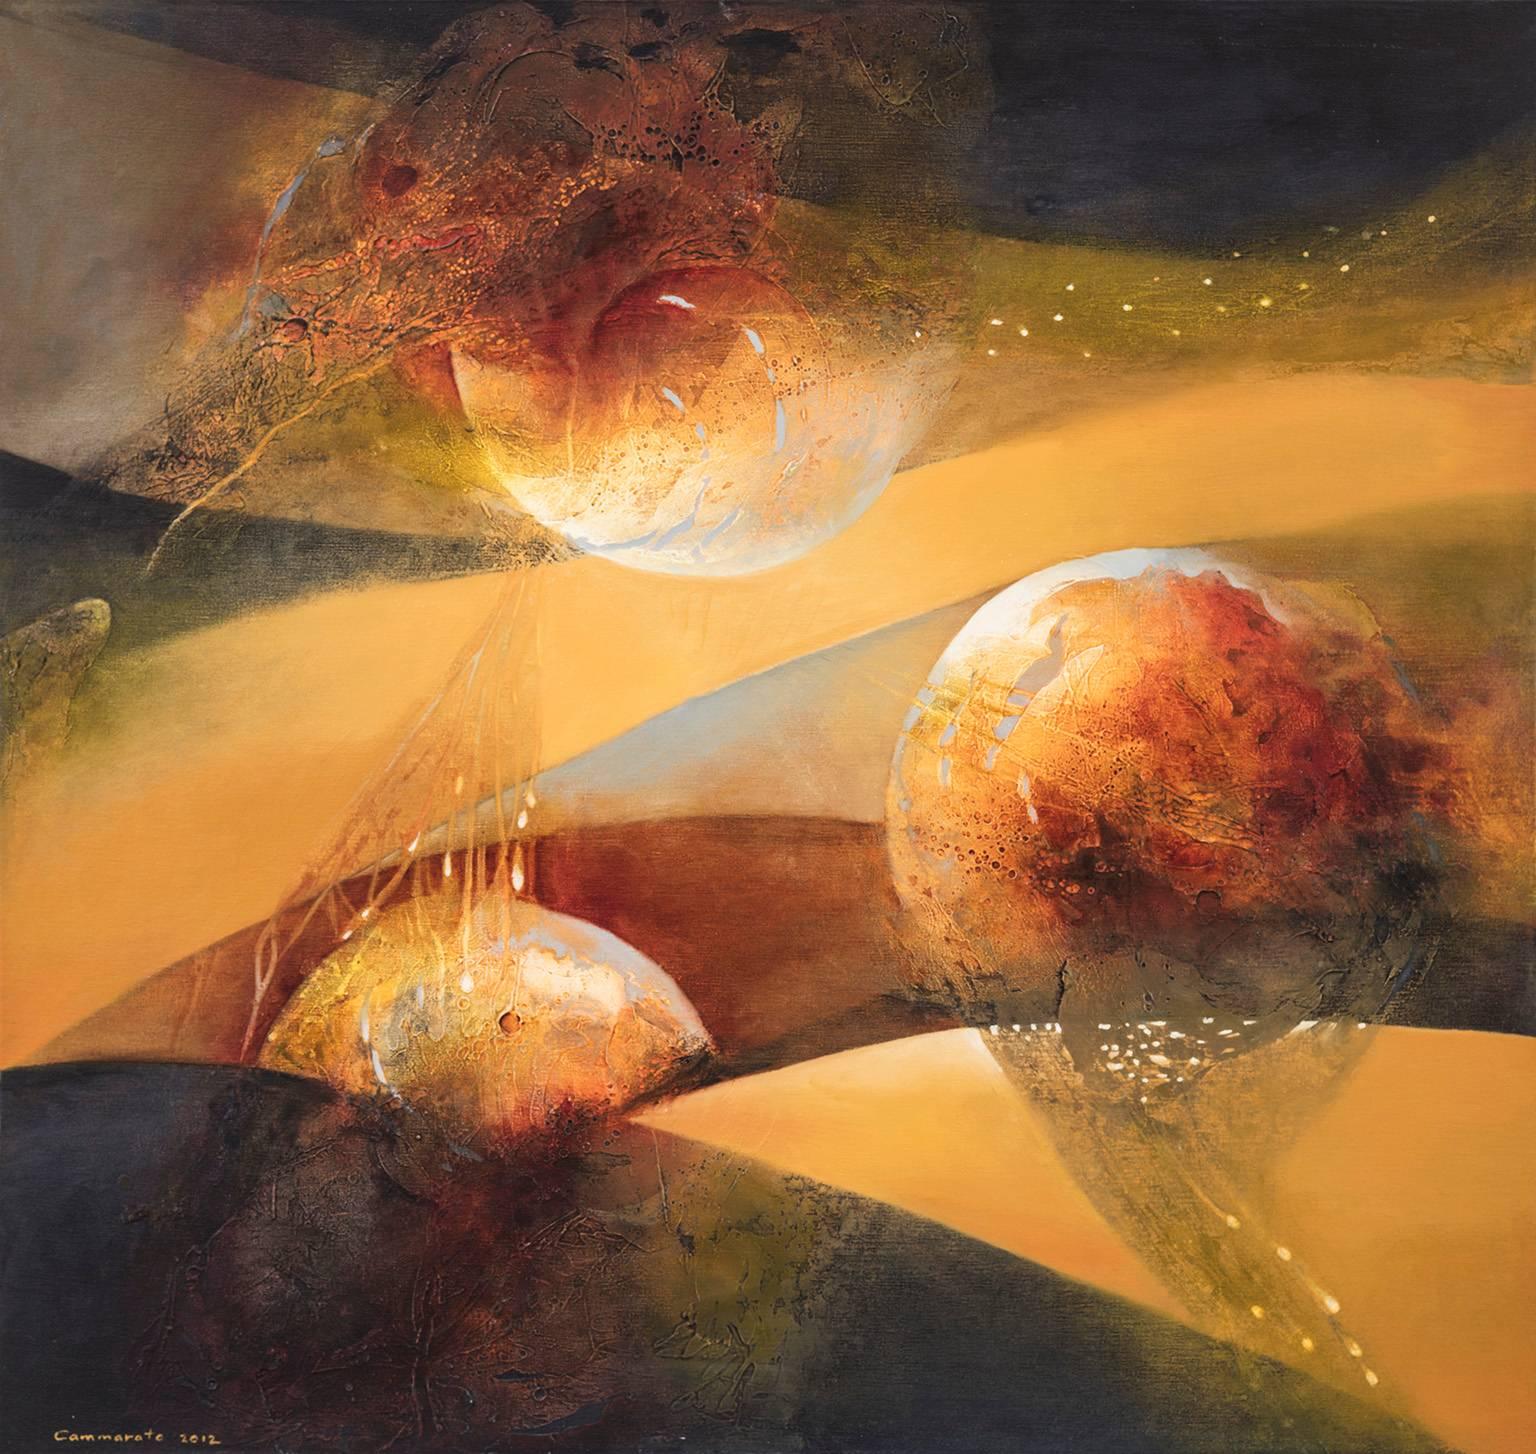 Kathleen Cammarata Abstract Painting - "Sisters of Astral Lights" - Horizontal planet painting in autumn colors.